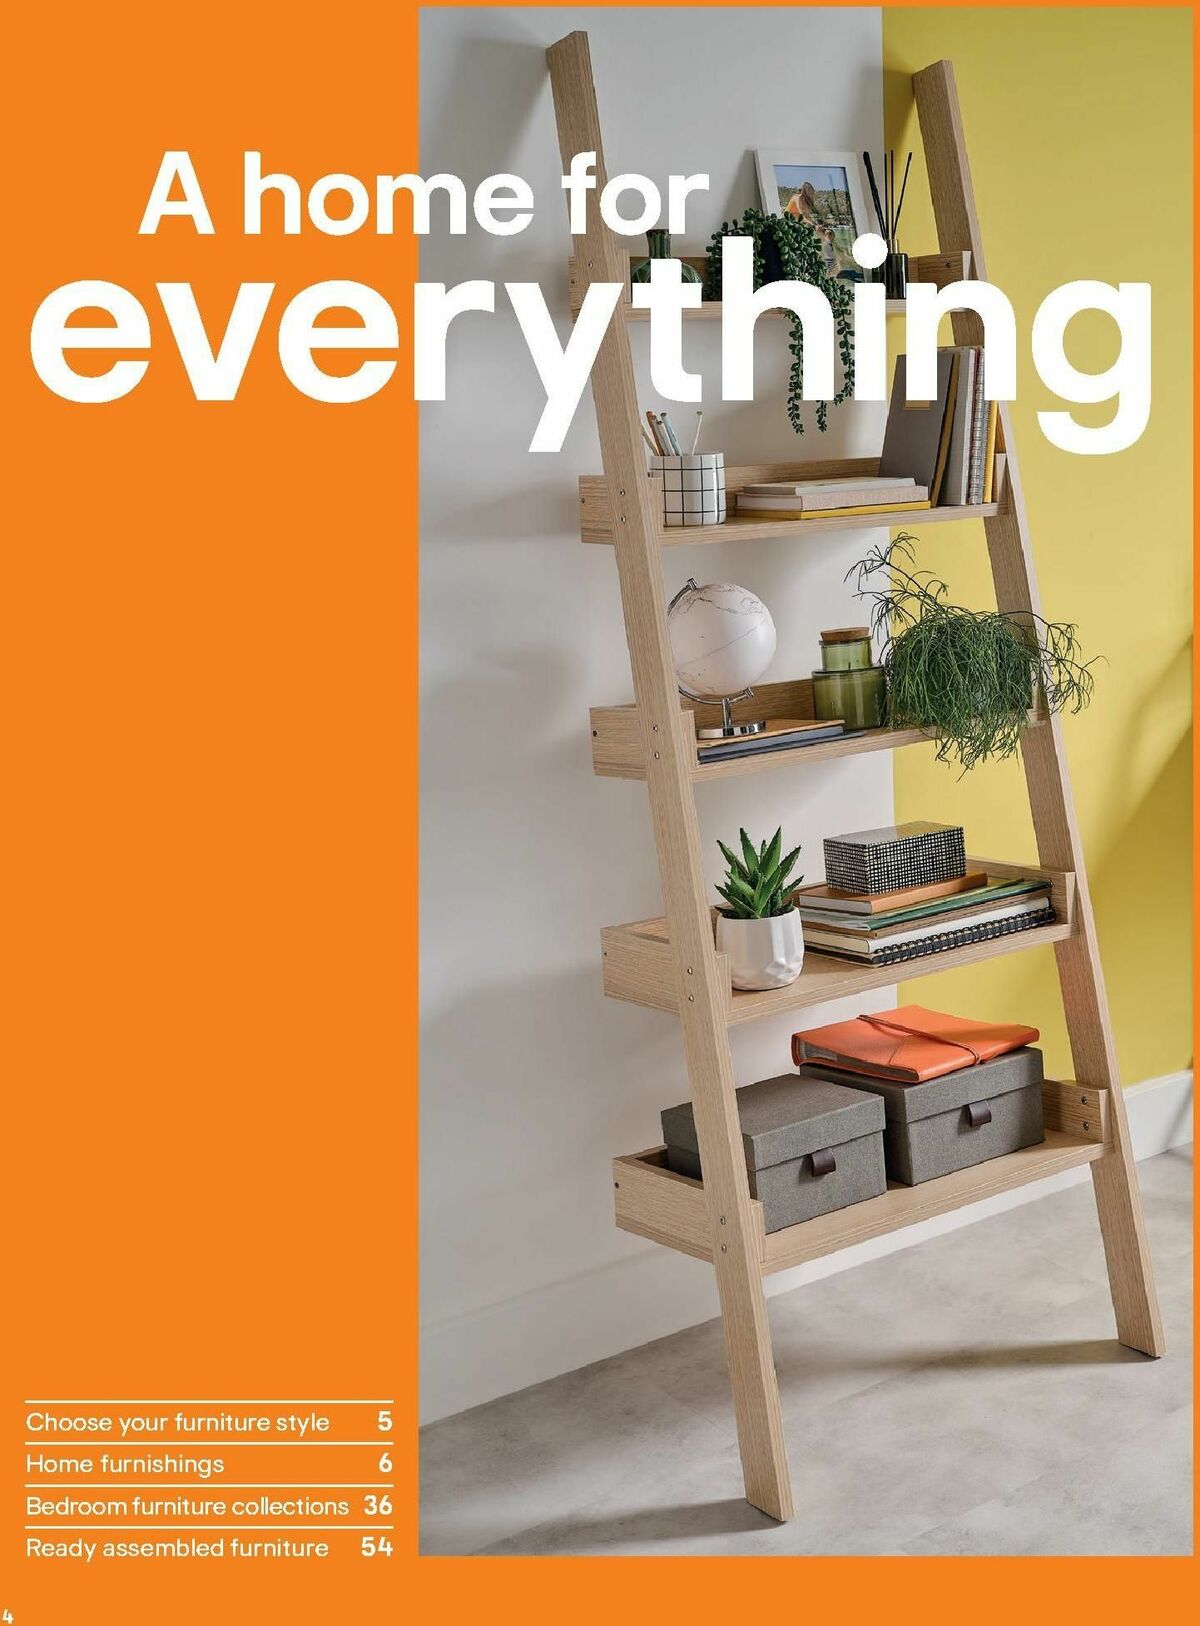 B&Q Freestanding Furniture Offers from 15 October